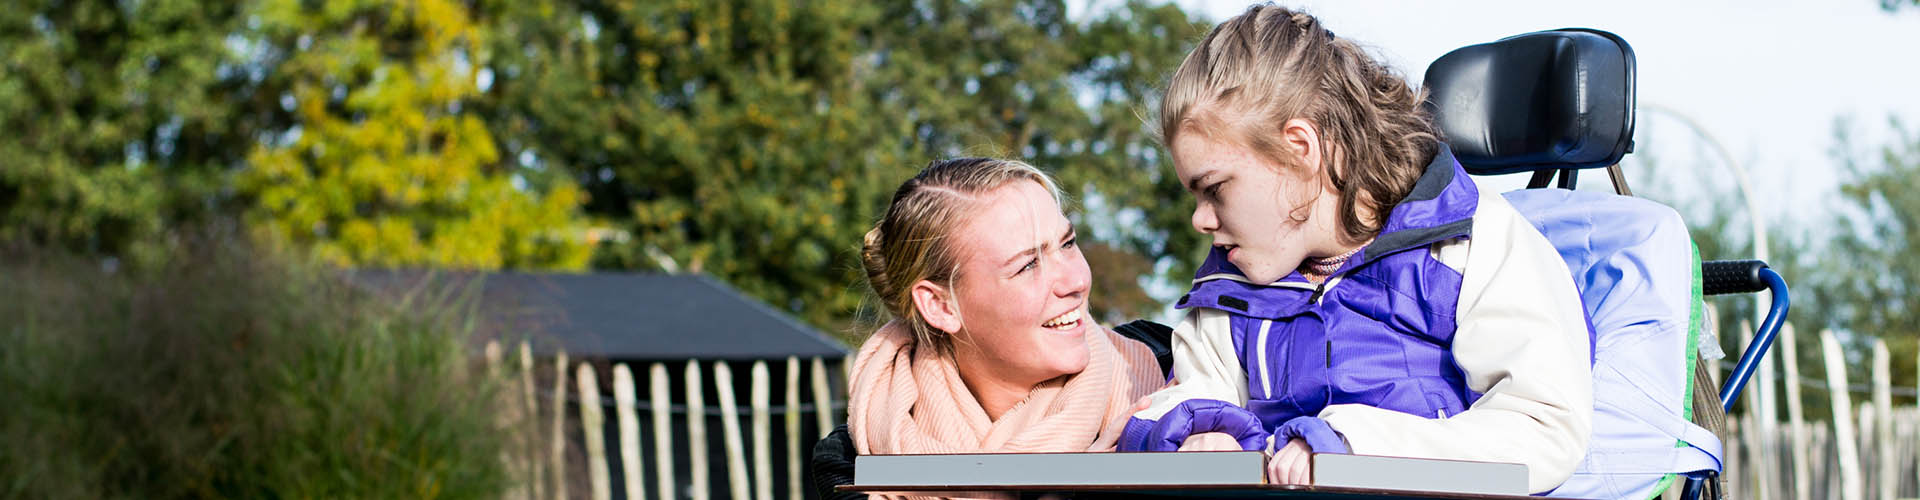 Young girl with disabilities riding in an assisted mobility device with a caregiver by her side